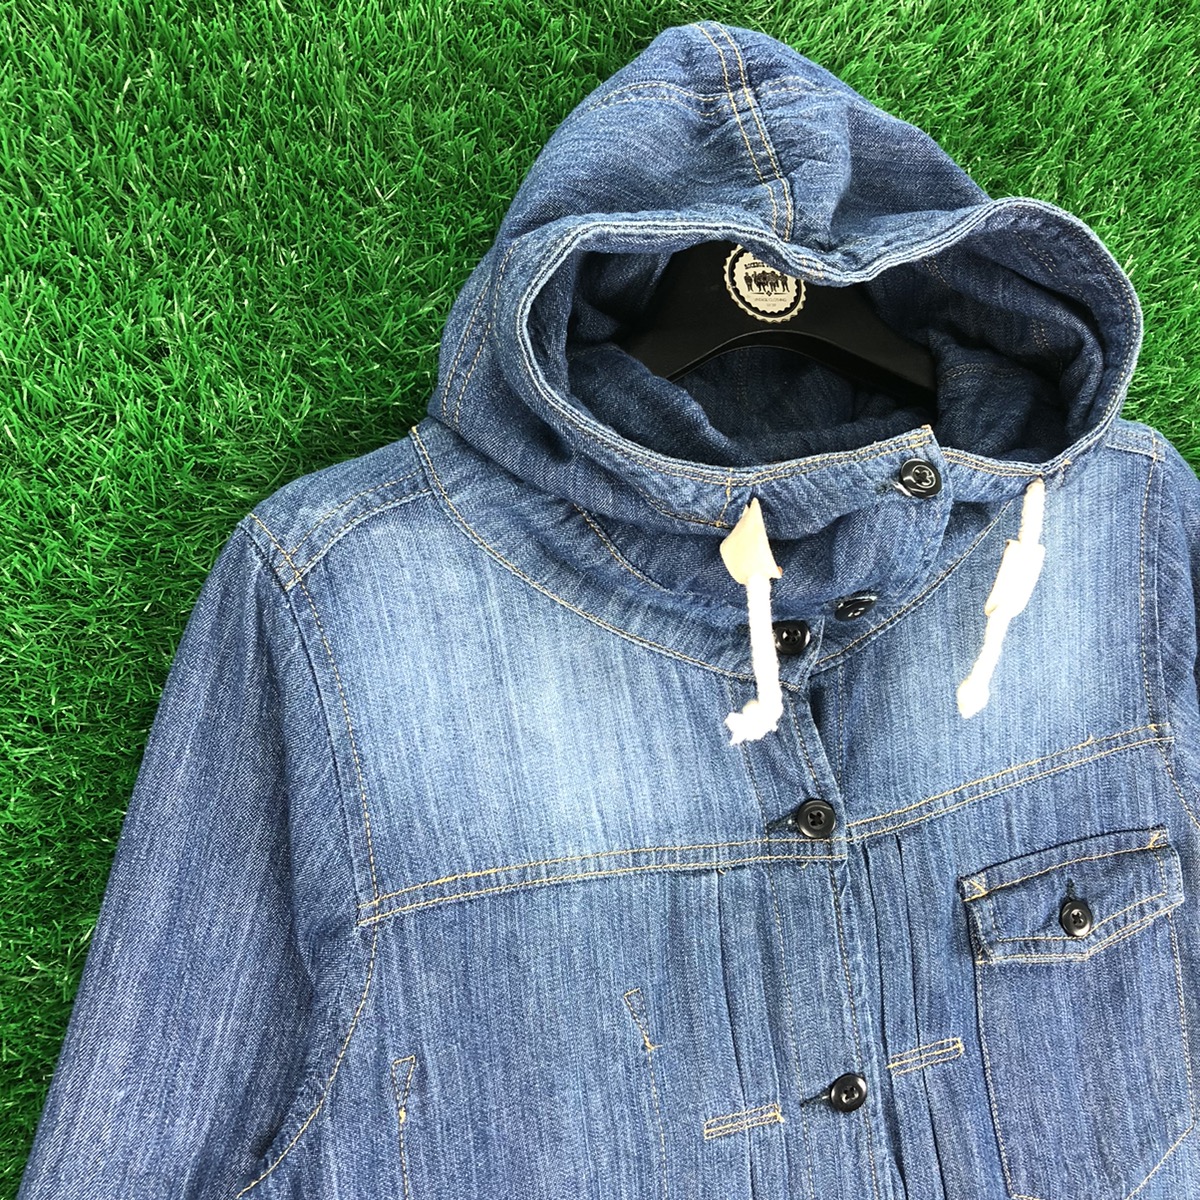 Archival Clothing - Long Blouse Hoodie Denim Button up by Quelle Chance - 2